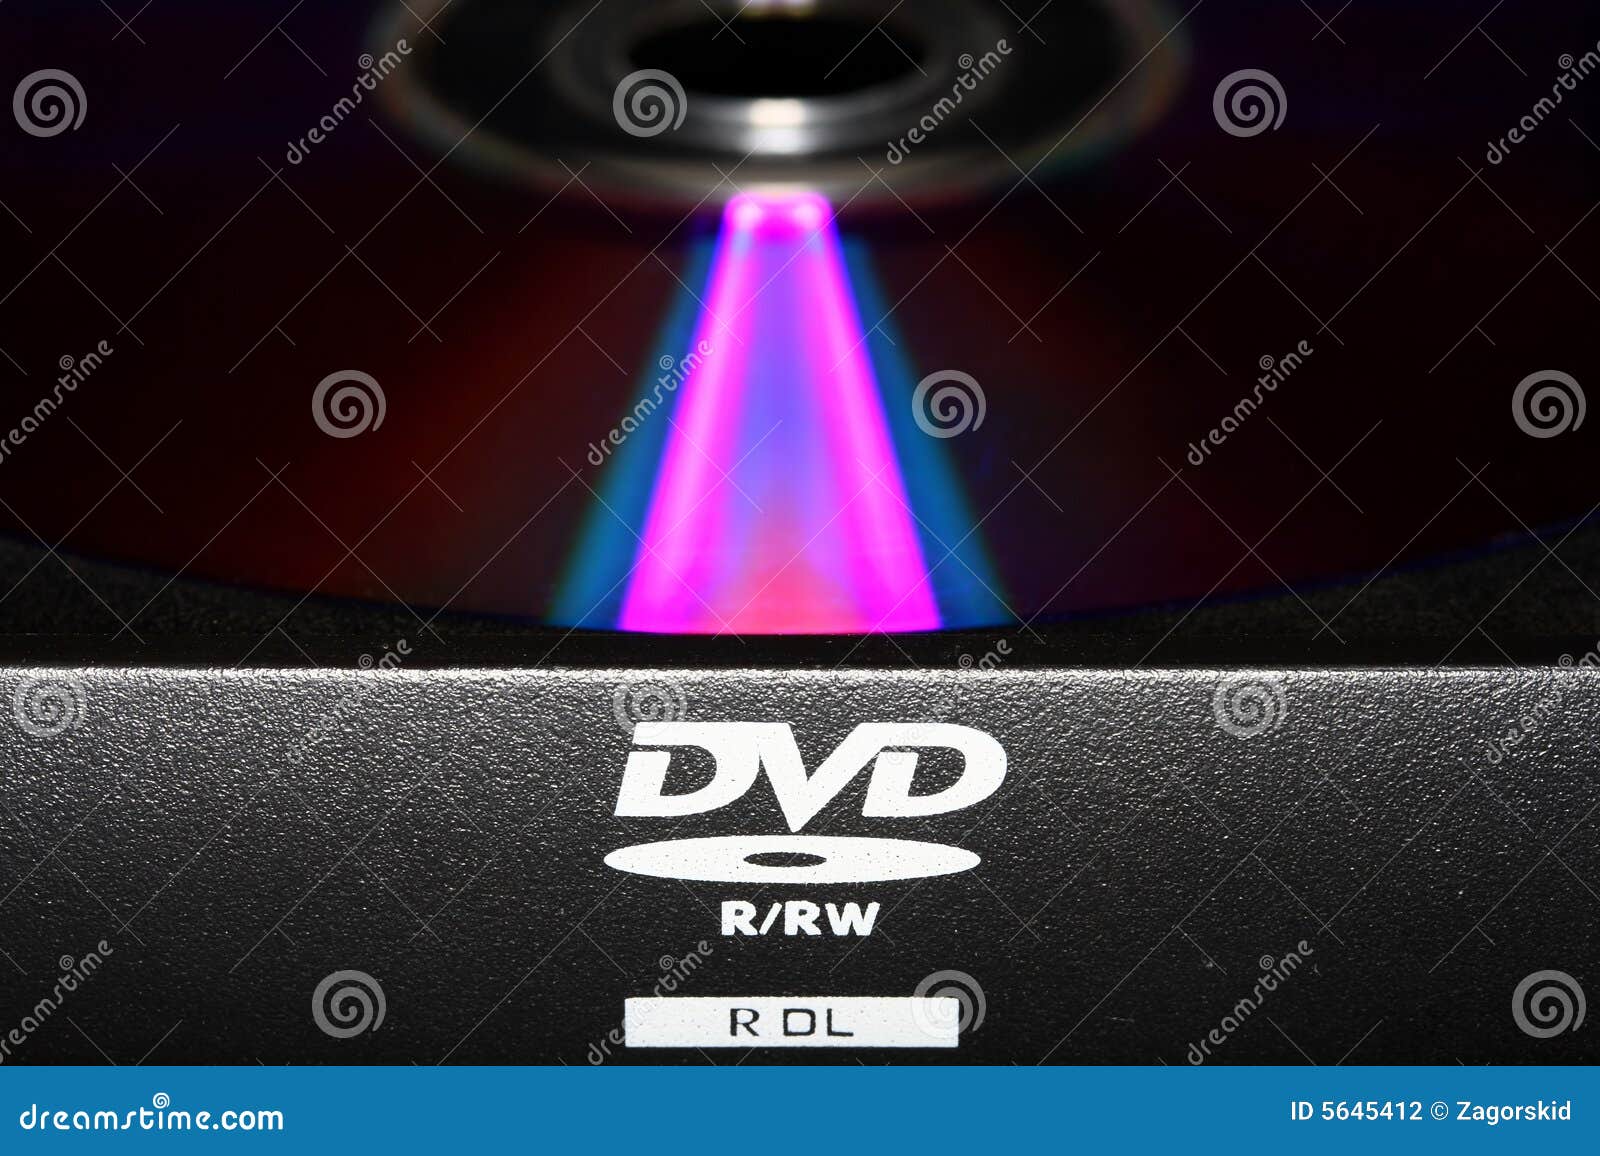 Dvd technology logo Stock Vector Images - Alamy